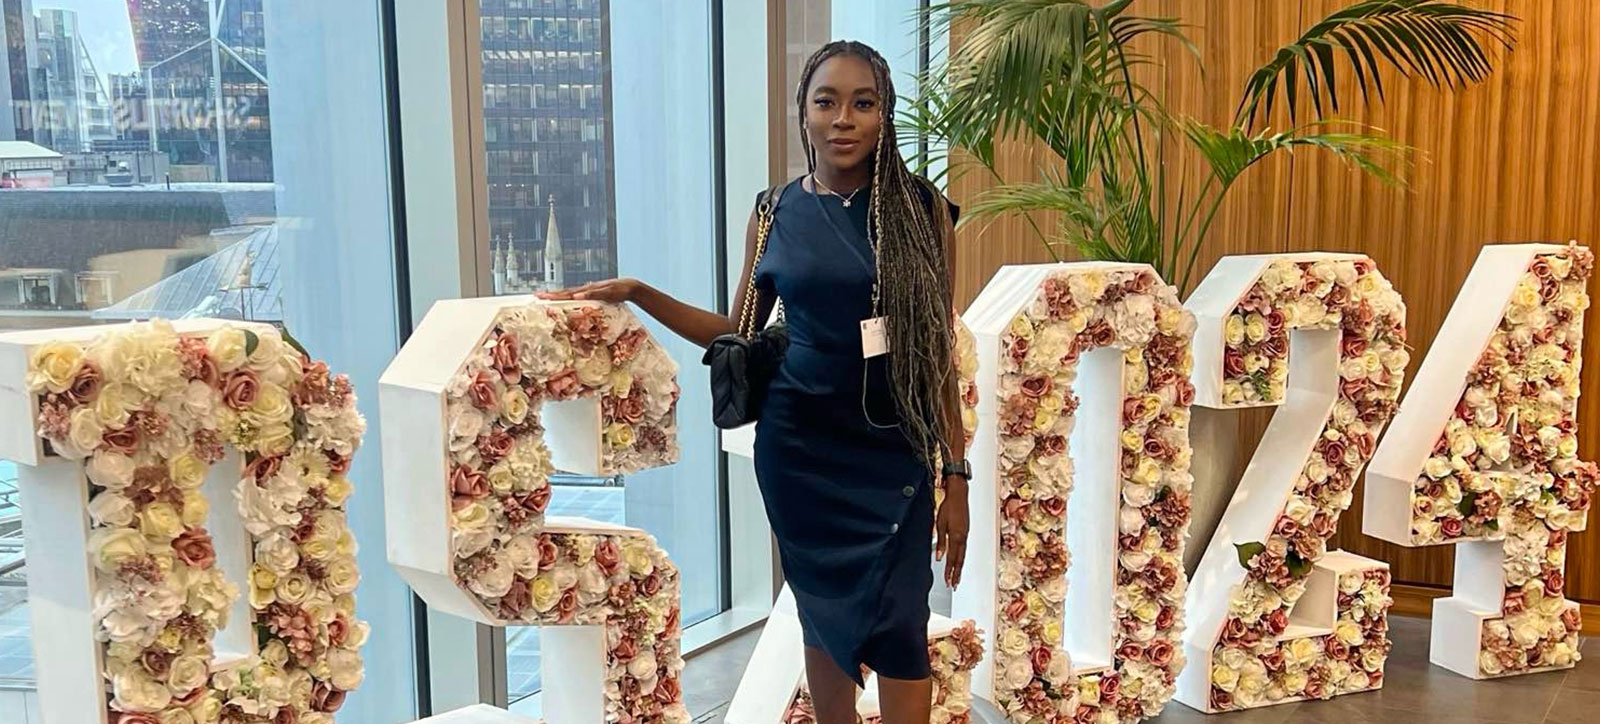 Toyosi Olowe, who has won a Rising Star Award for her start-up, pictured at WBS London at The Shard